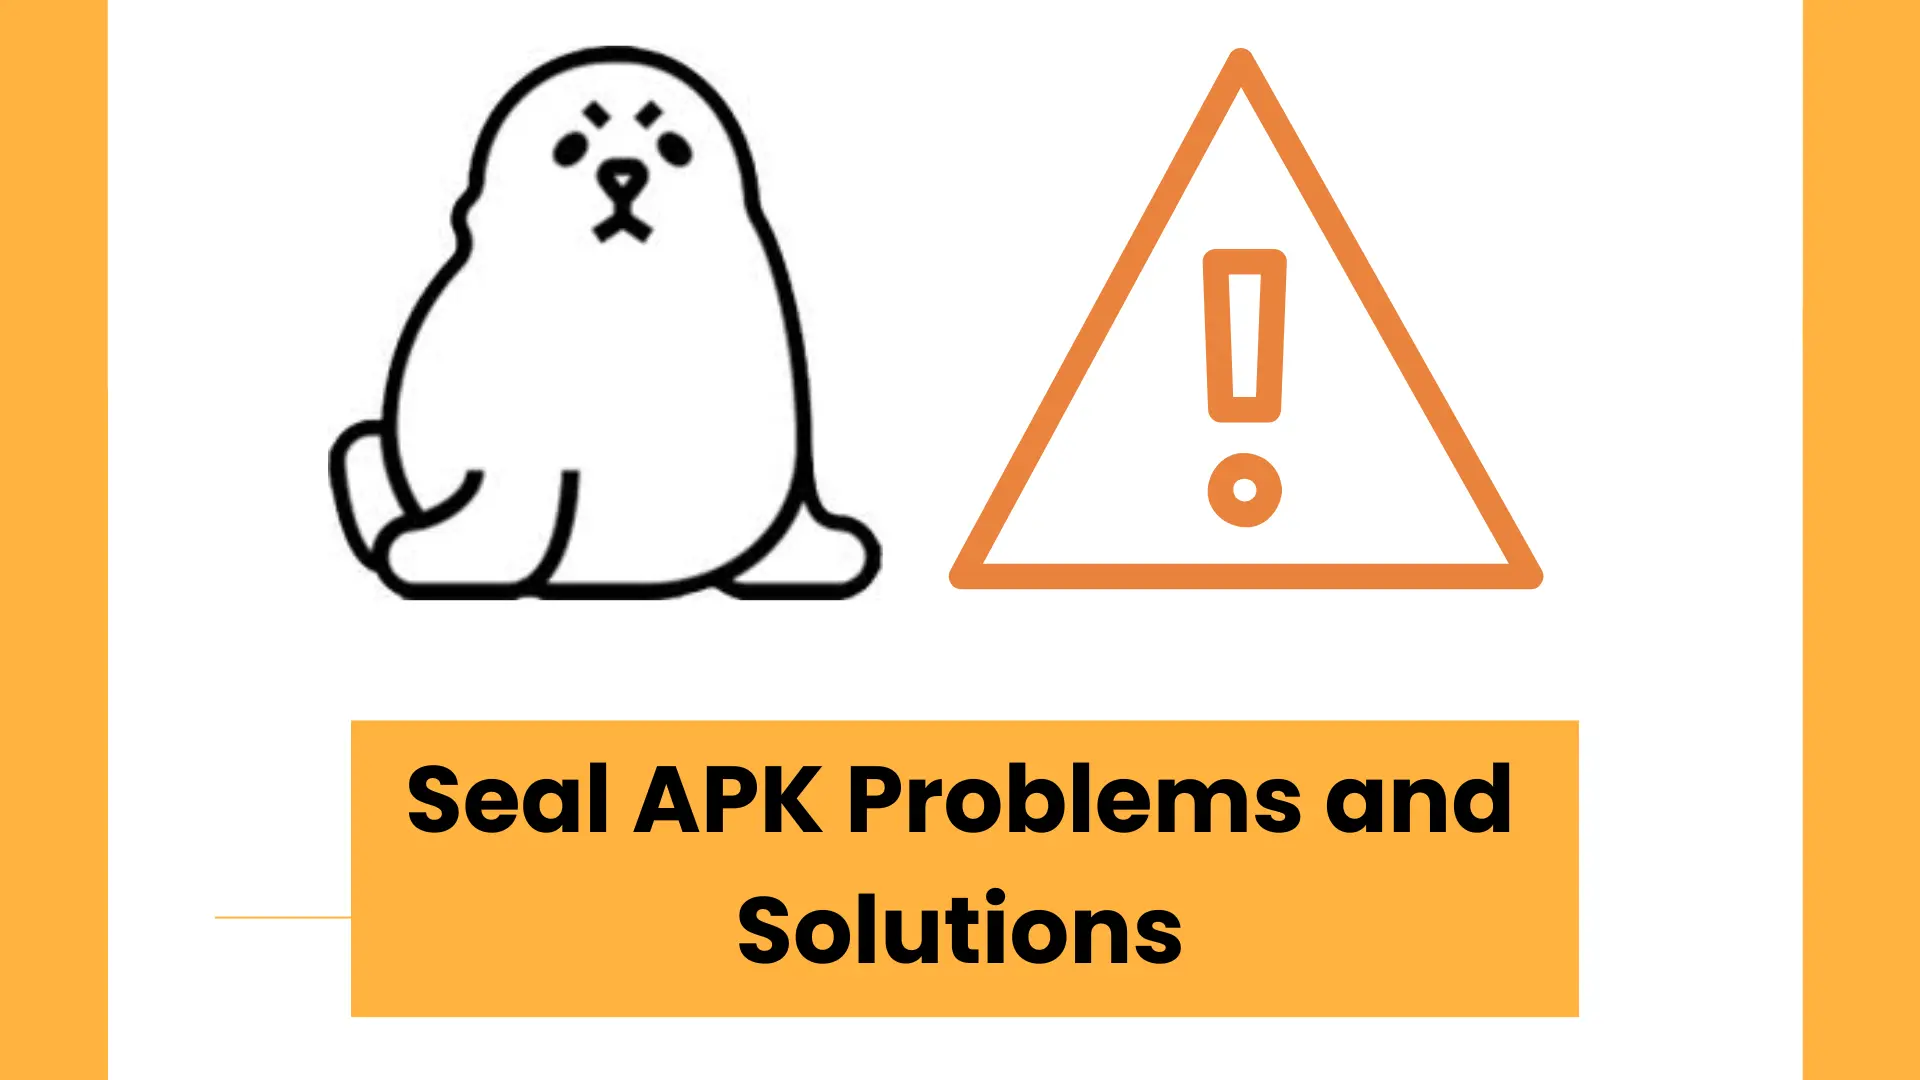 Seal APK Problems and their possibles solutions